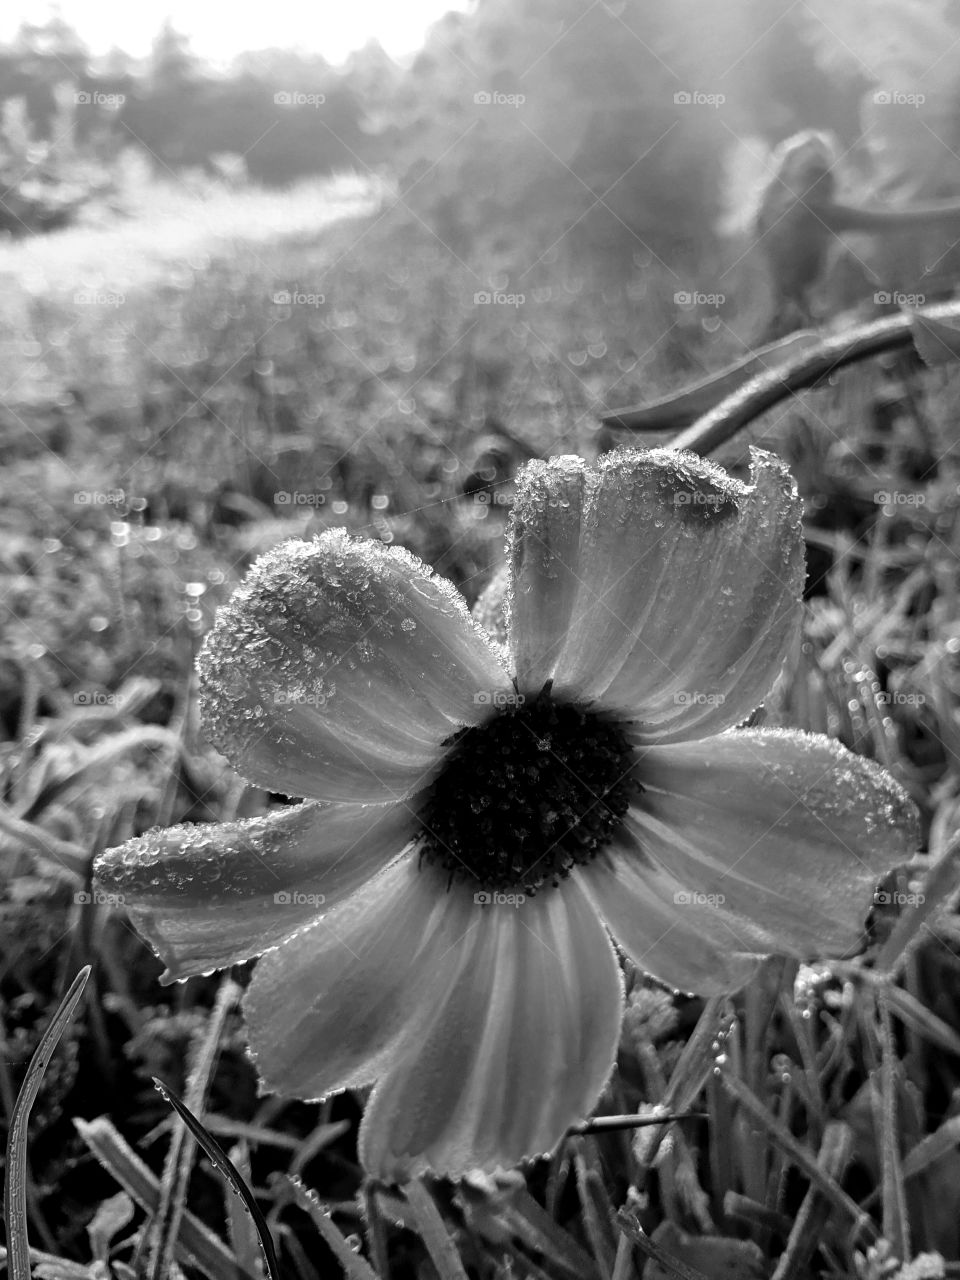 A flower in the morninglight. Black and white.